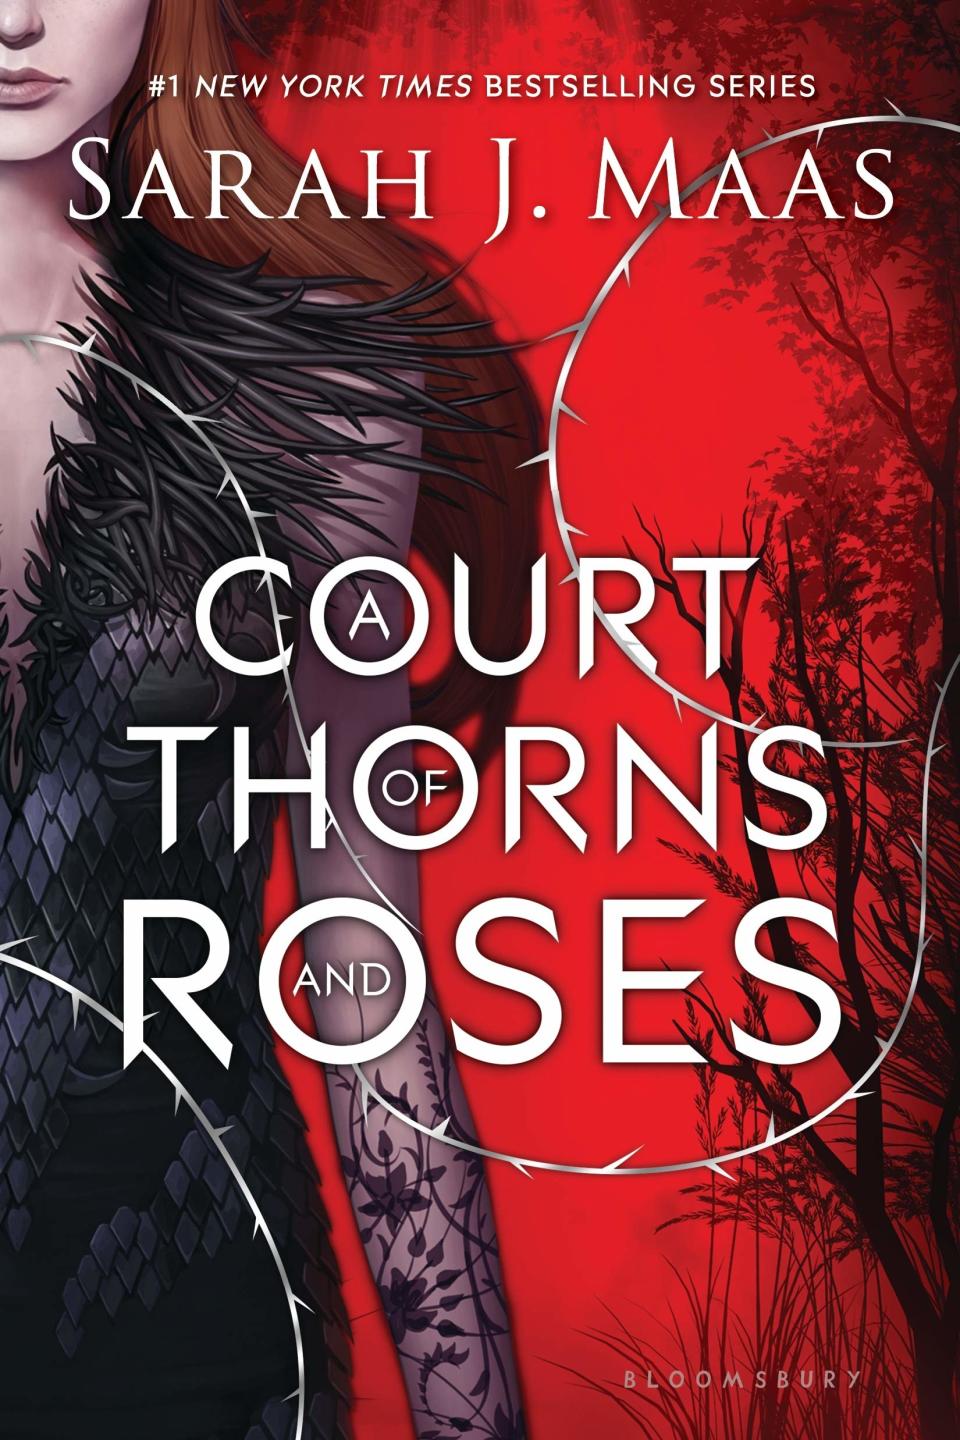 “A Court of Thorns and Roses” by Sarah J. Maas